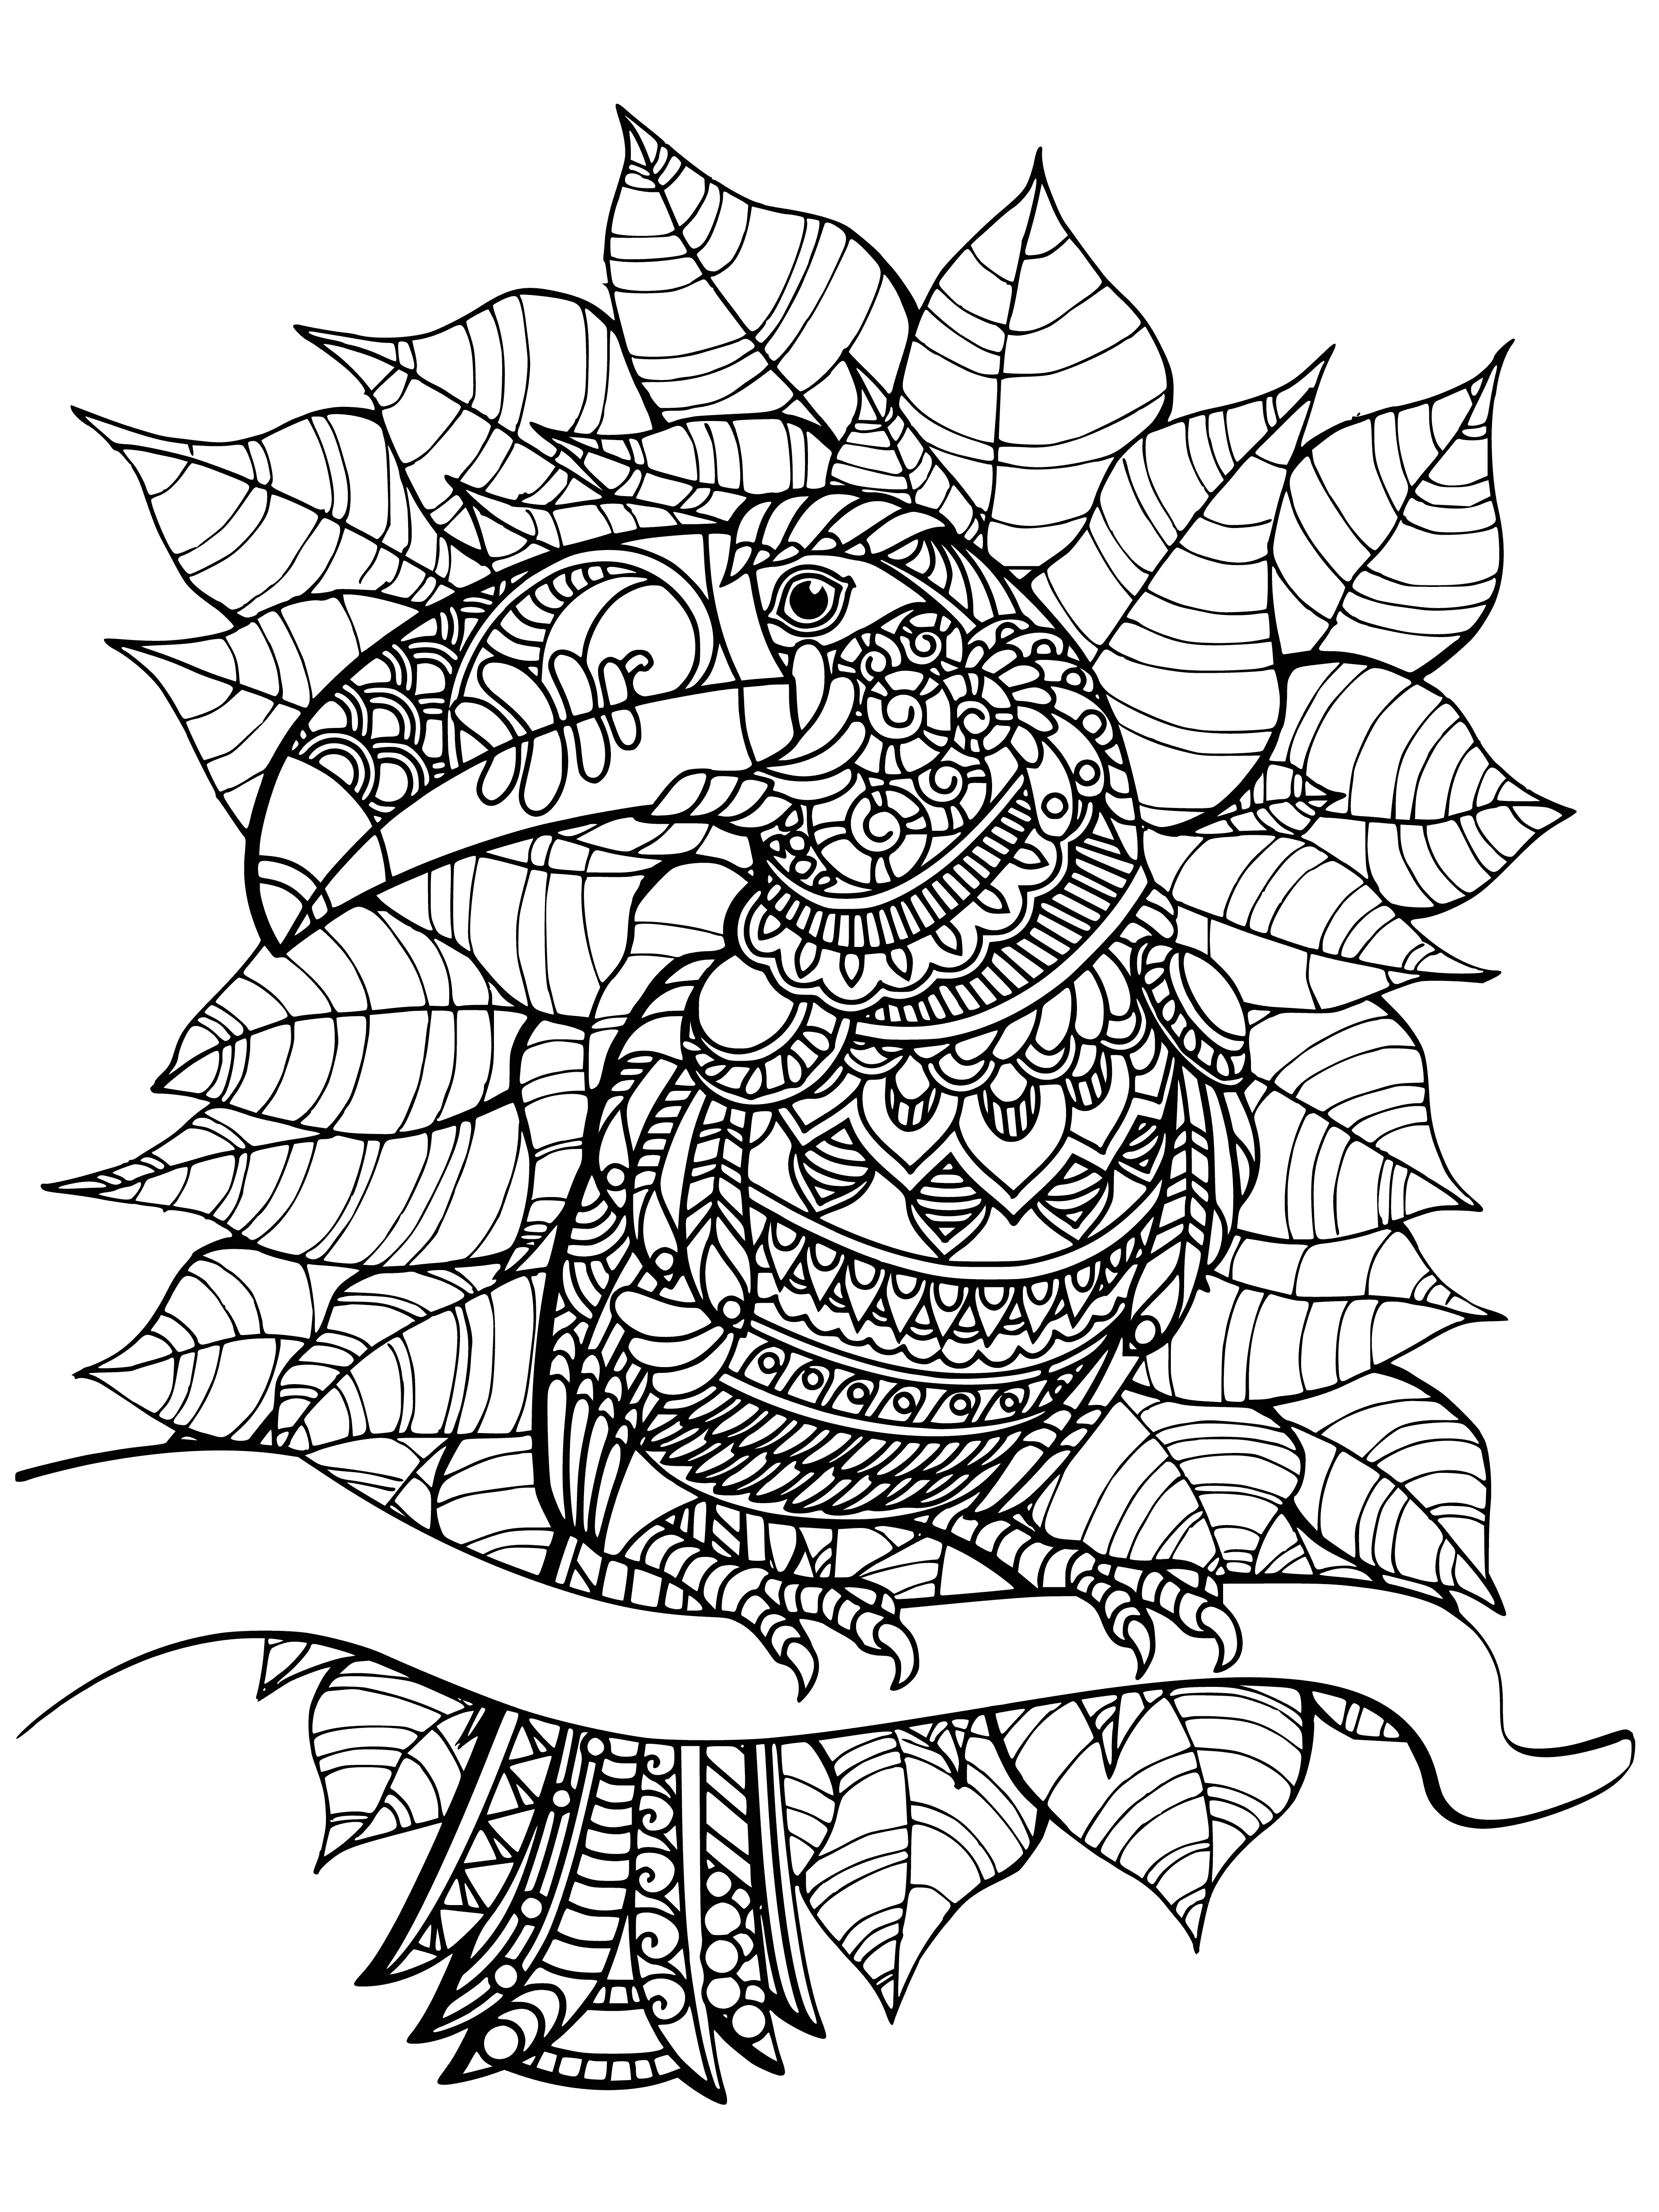 coloring page: A colorful toucan stands on a branch in the center with flowers surrounding it. Colors include yellow, orange, blue, and green.